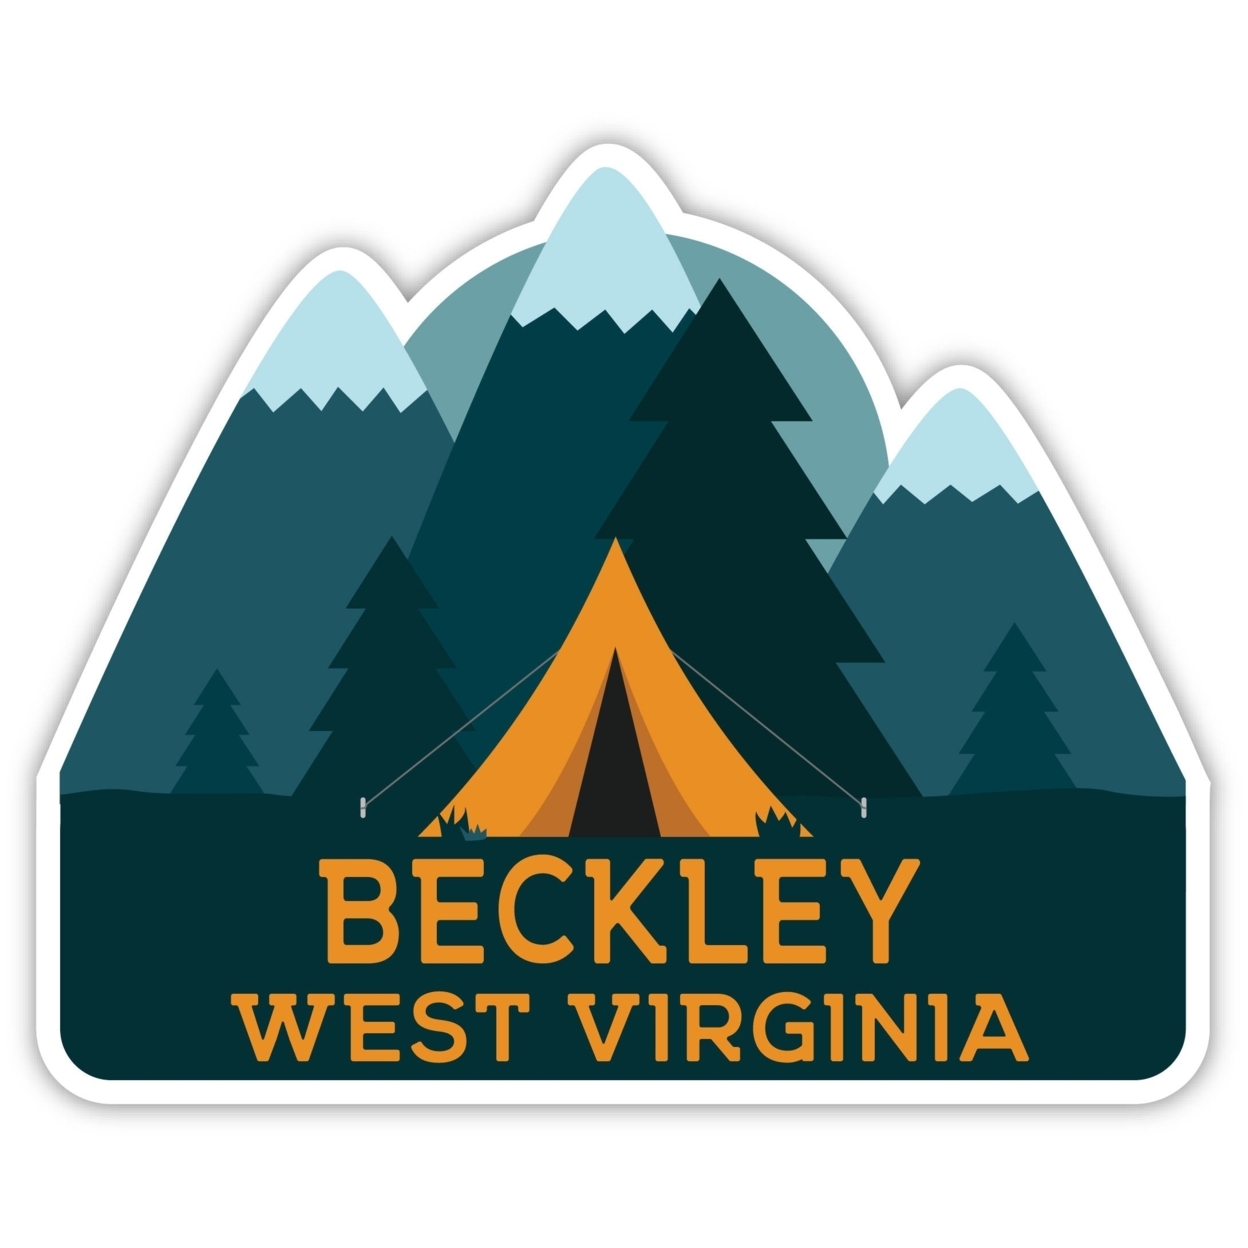 Beckley West Virginia Souvenir Decorative Stickers (Choose Theme And Size) - 4-Pack, 8-Inch, Bear